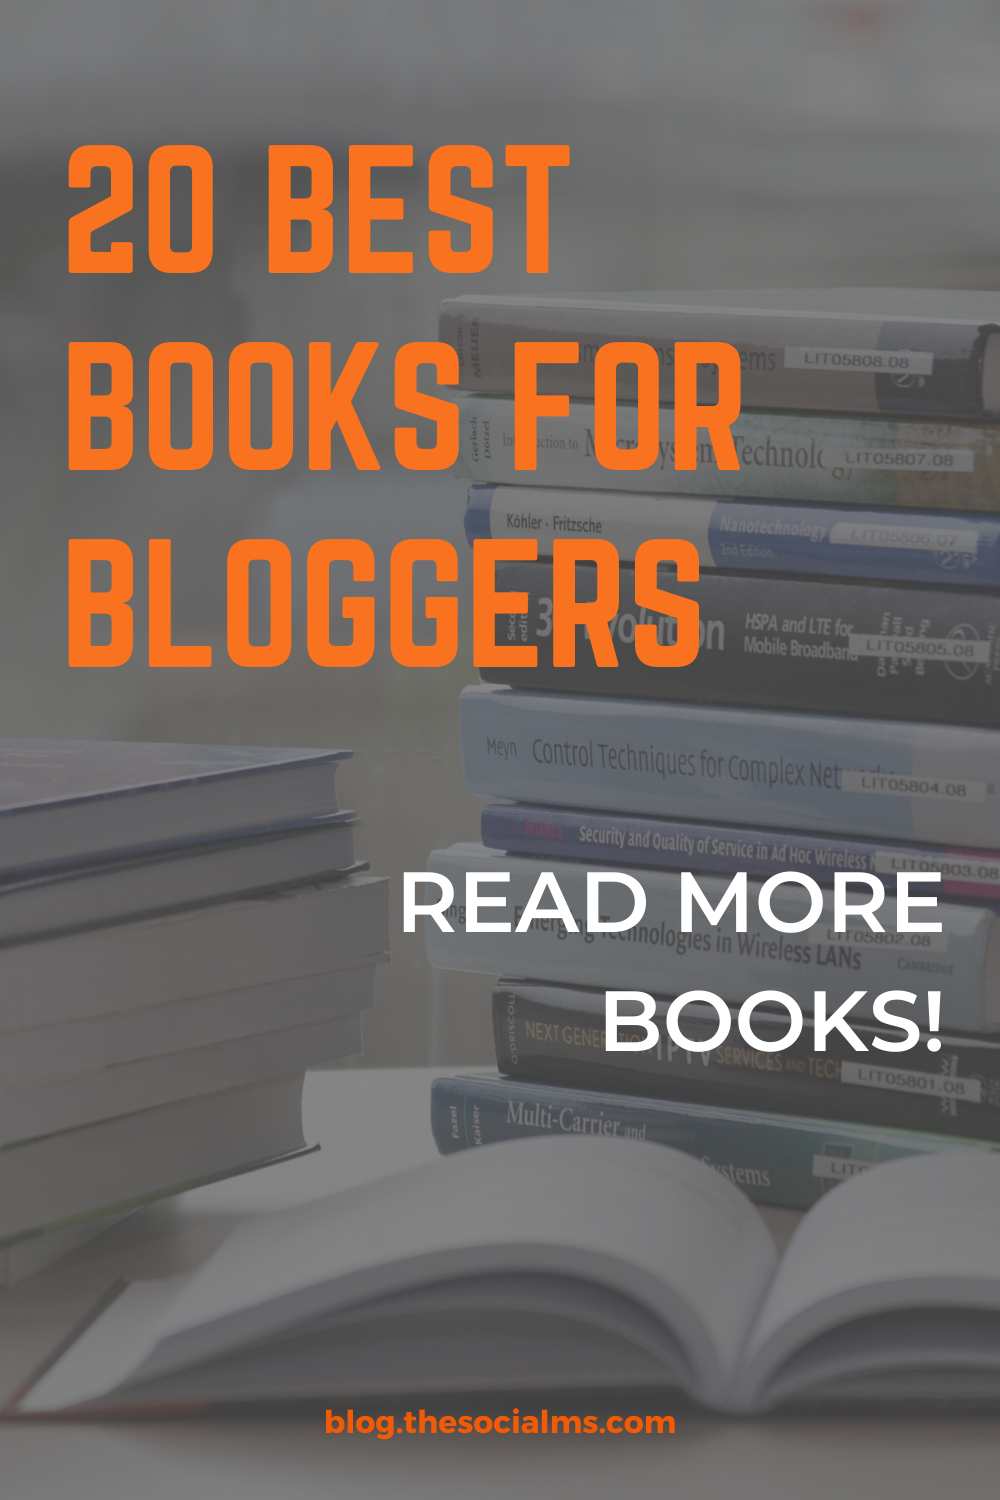 Here are the best books for bloggers that we found helpful and entertaining. You will learn how to start a blog and get some advanced blogging tips. #blogging101 #bloggingforbeginners #startablog #bloggingtips #bloggingsuccess #businessbooks